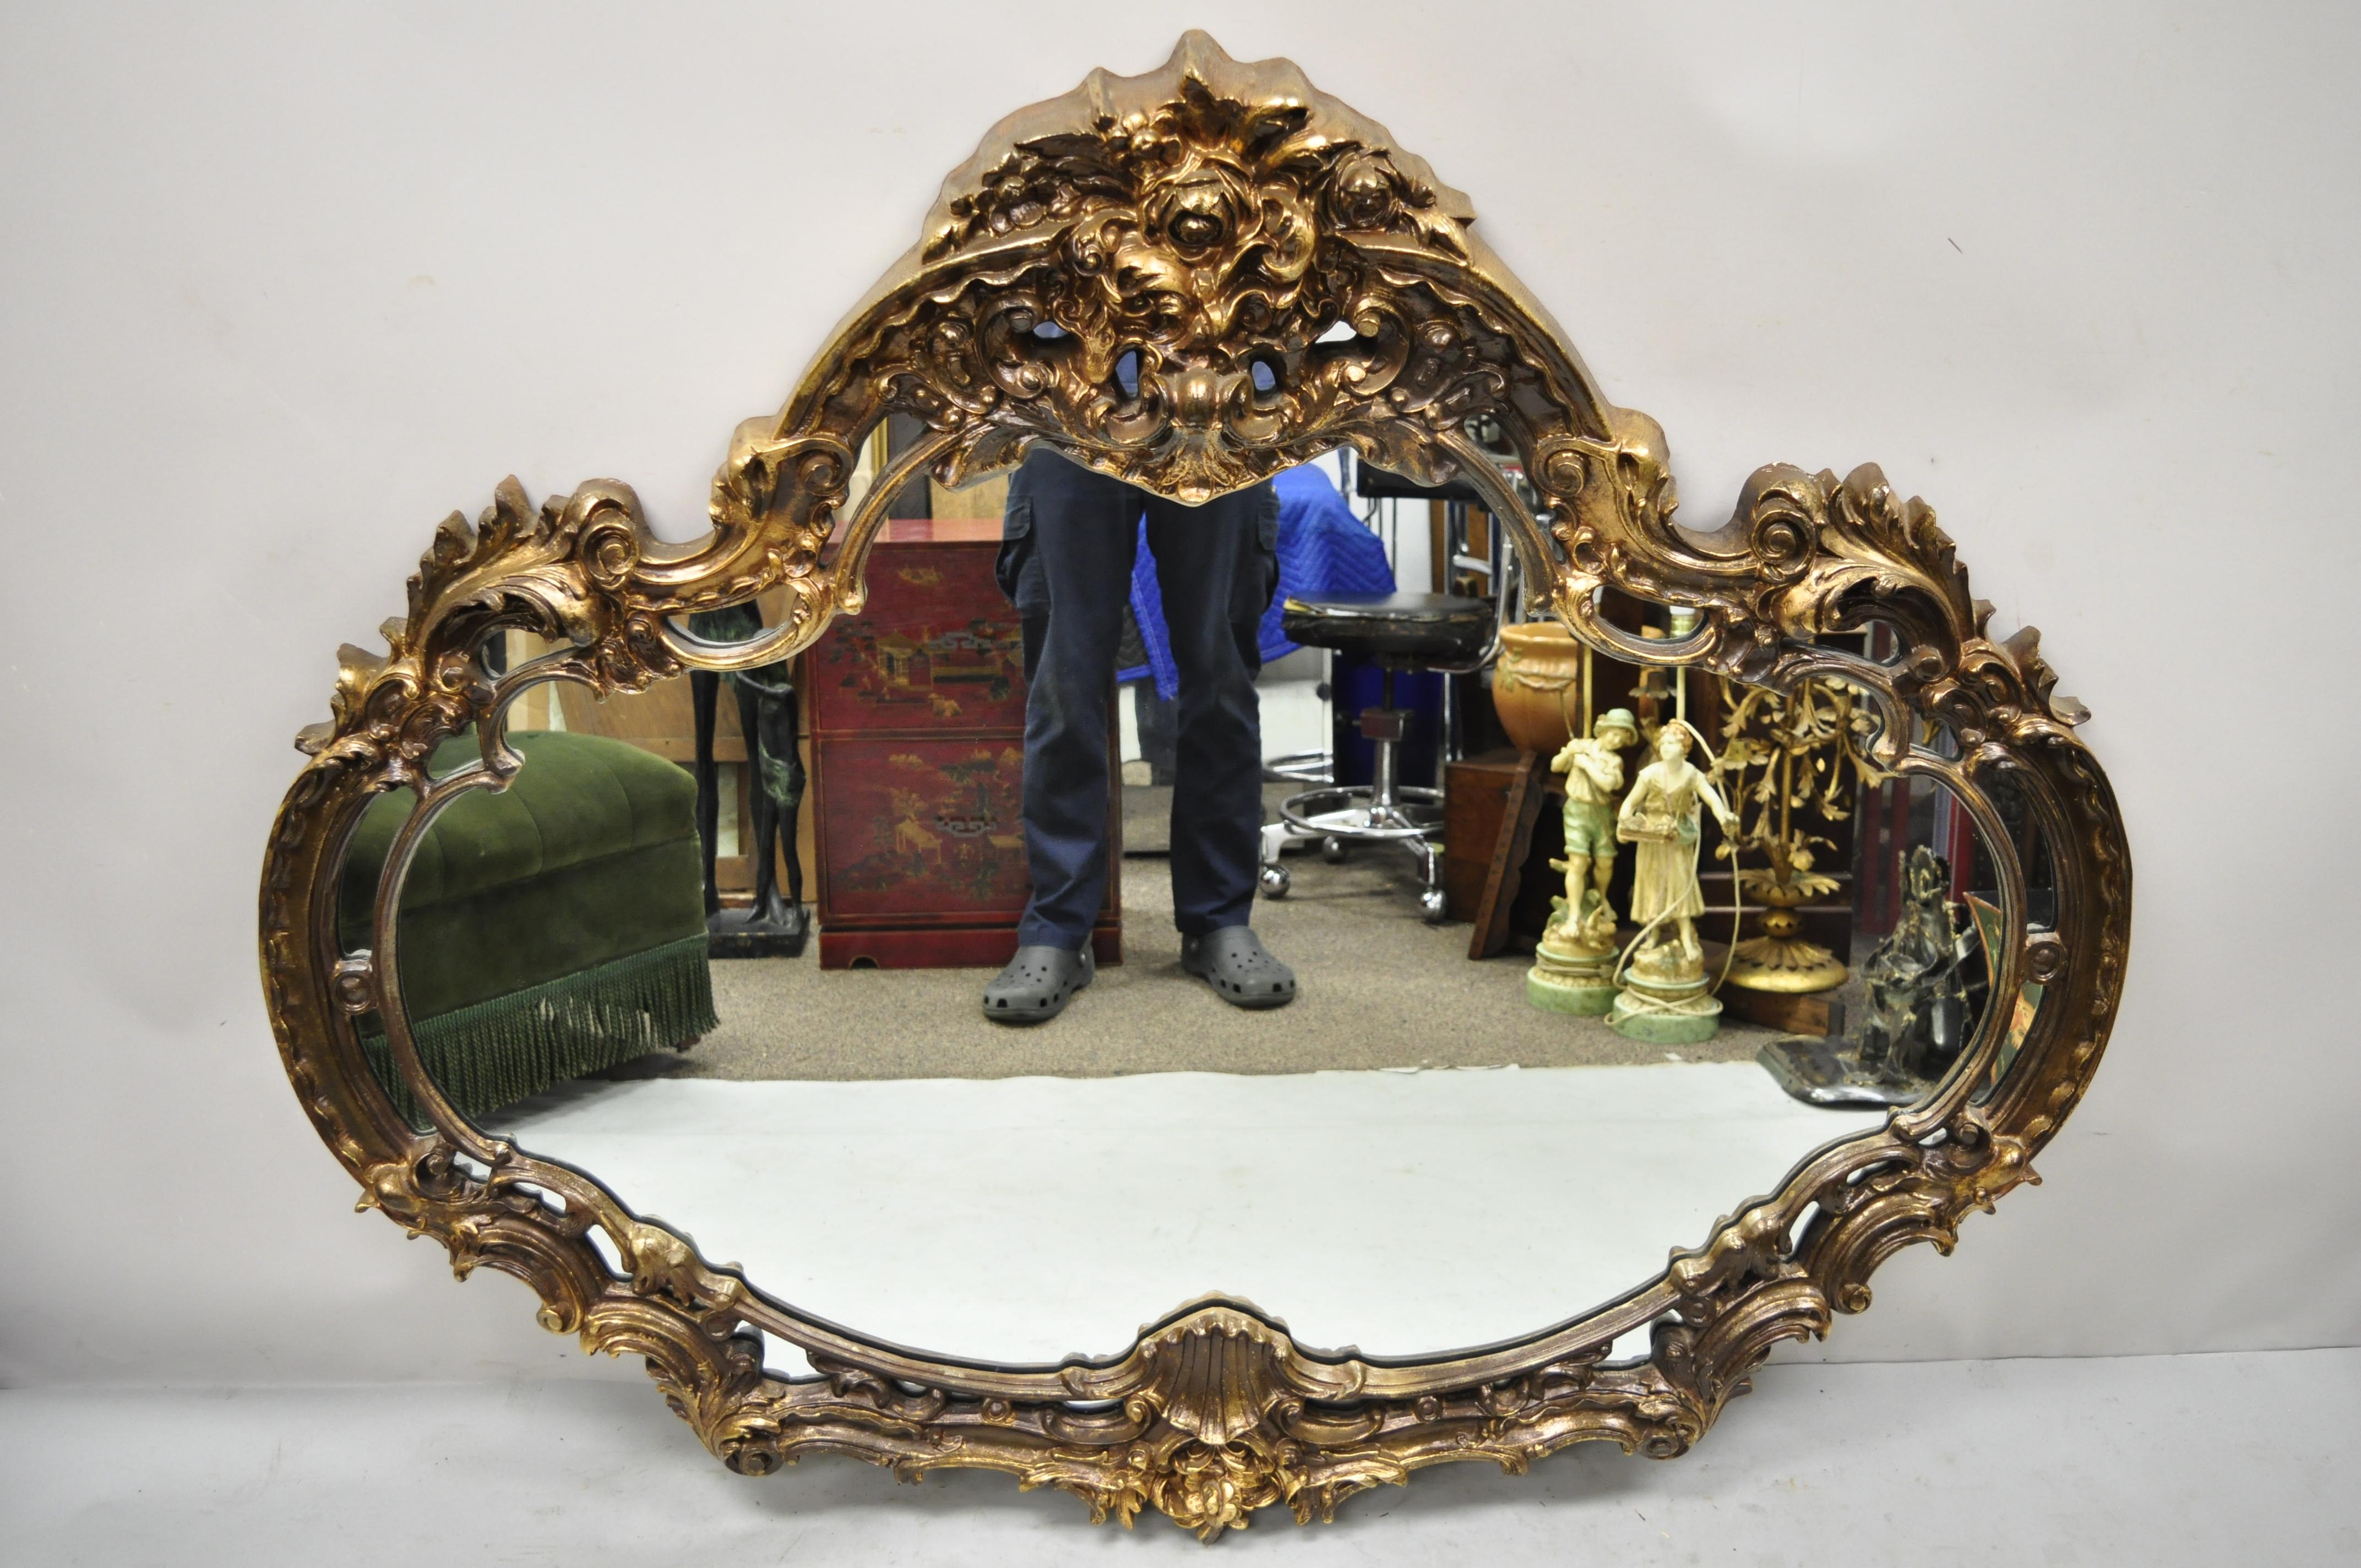 Vintage Italian Baroque style gold Hollywood Regency large sofa wall mirror. Item features molded foam ornate frame, large impressive size, distressed gold finish, great style and form. Circa 1970s. Measurements: 50